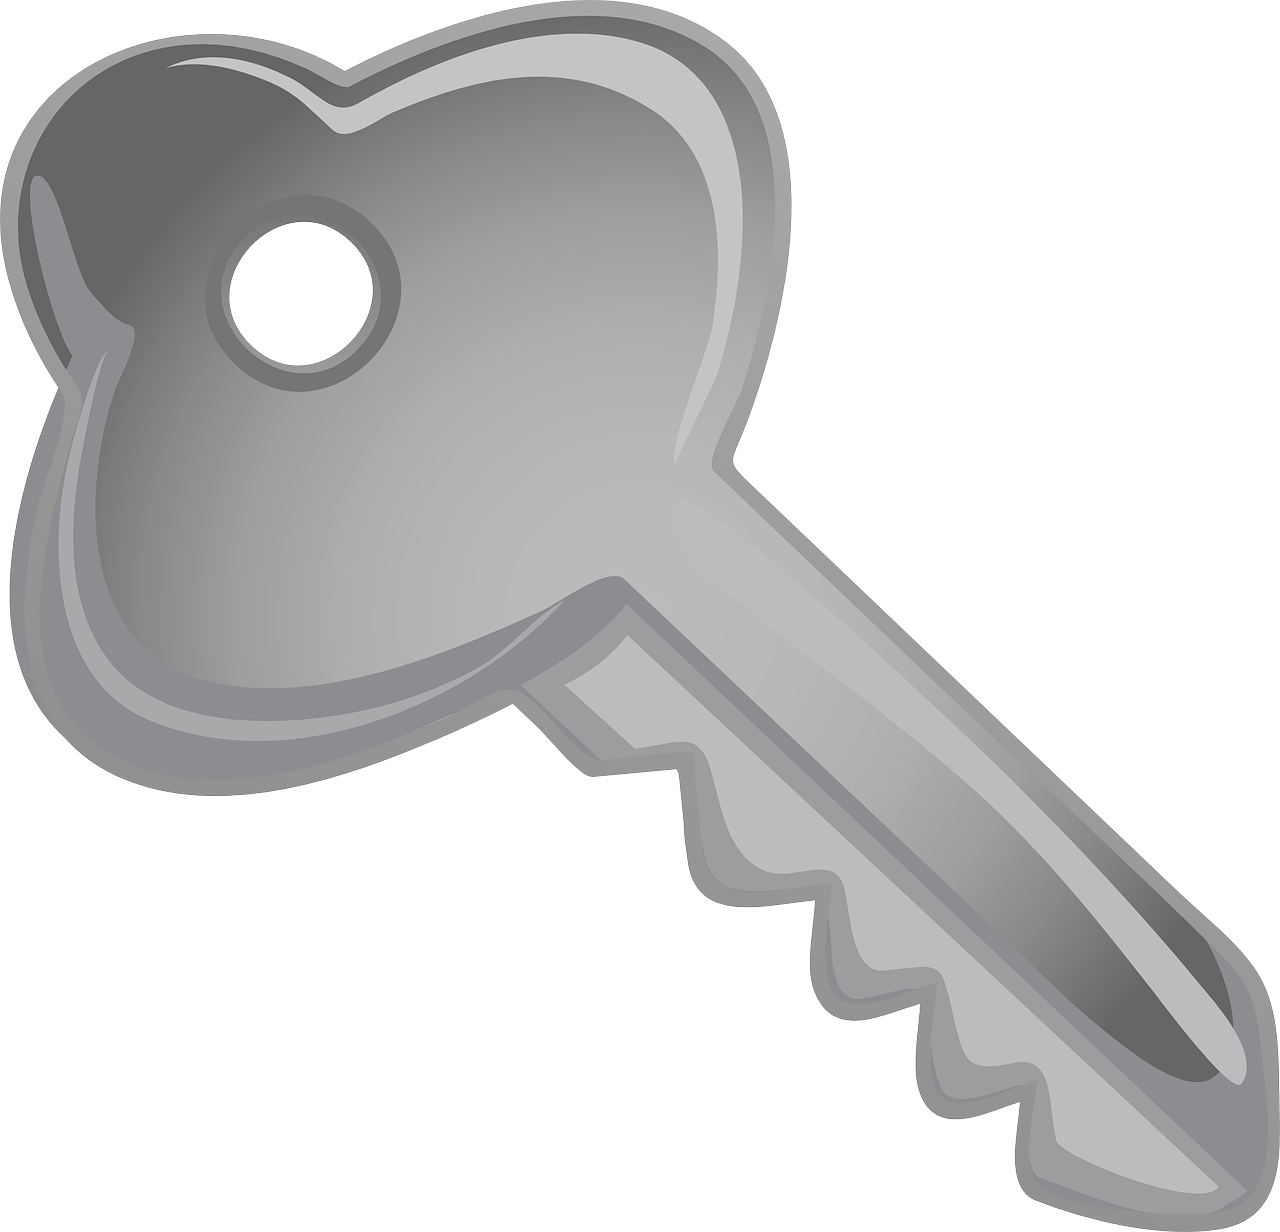 a metal key with a hole in the middle, an illustration of, computer art, no gradients, solid gray, clip art, right side key light